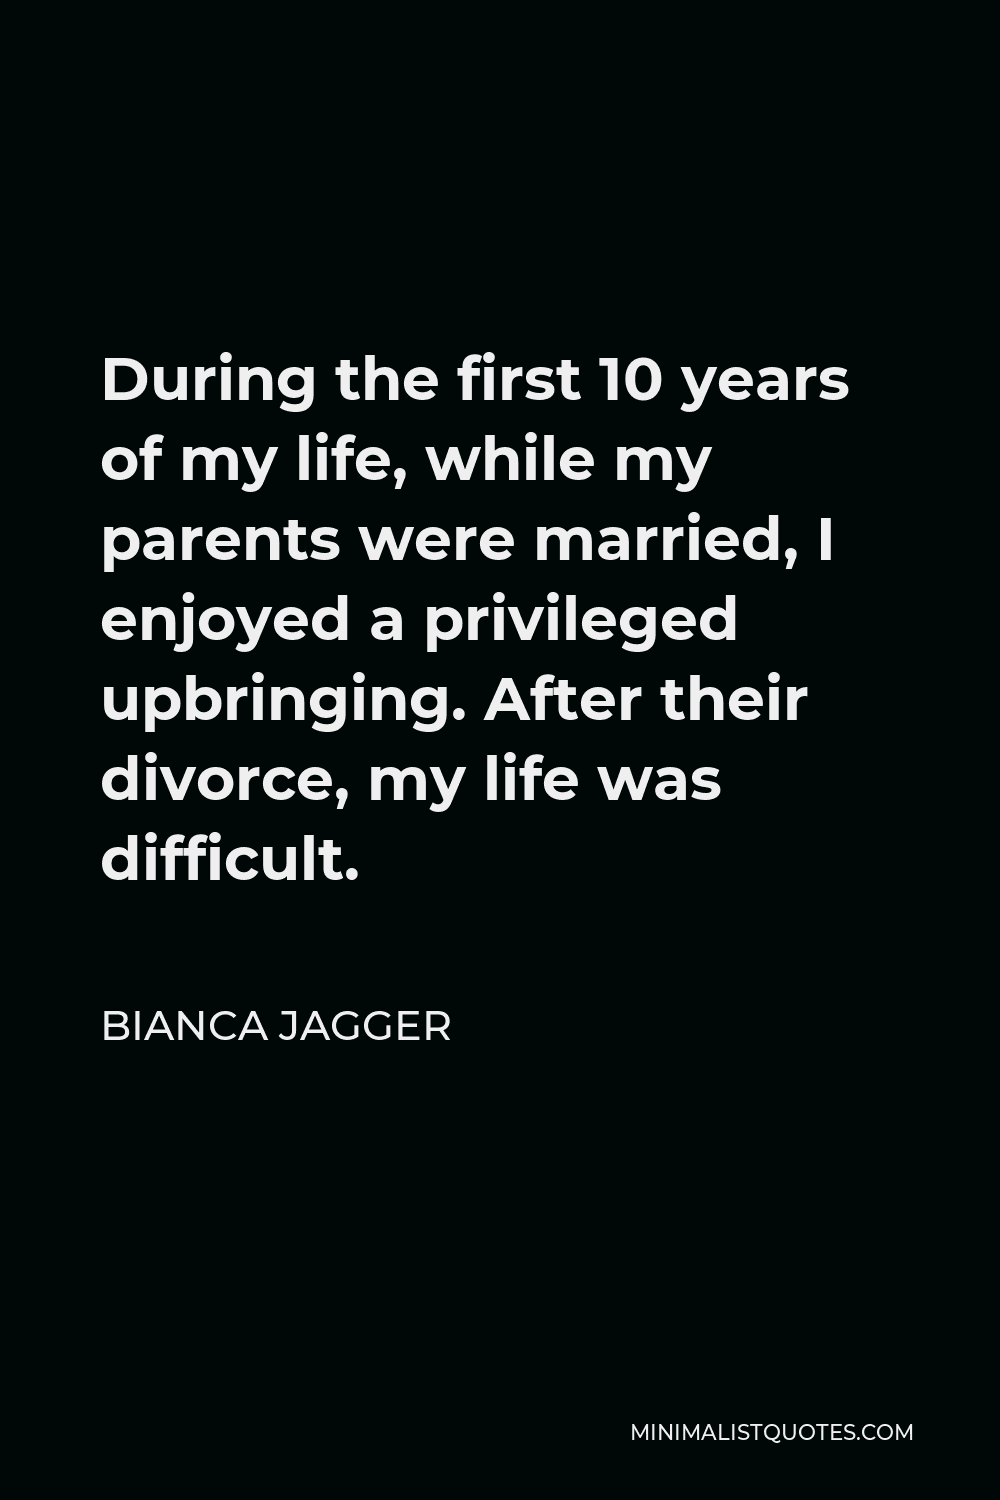 Bianca Jagger Quote - During the first 10 years of my life, while my parents were married, I enjoyed a privileged upbringing. After their divorce, my life was difficult.